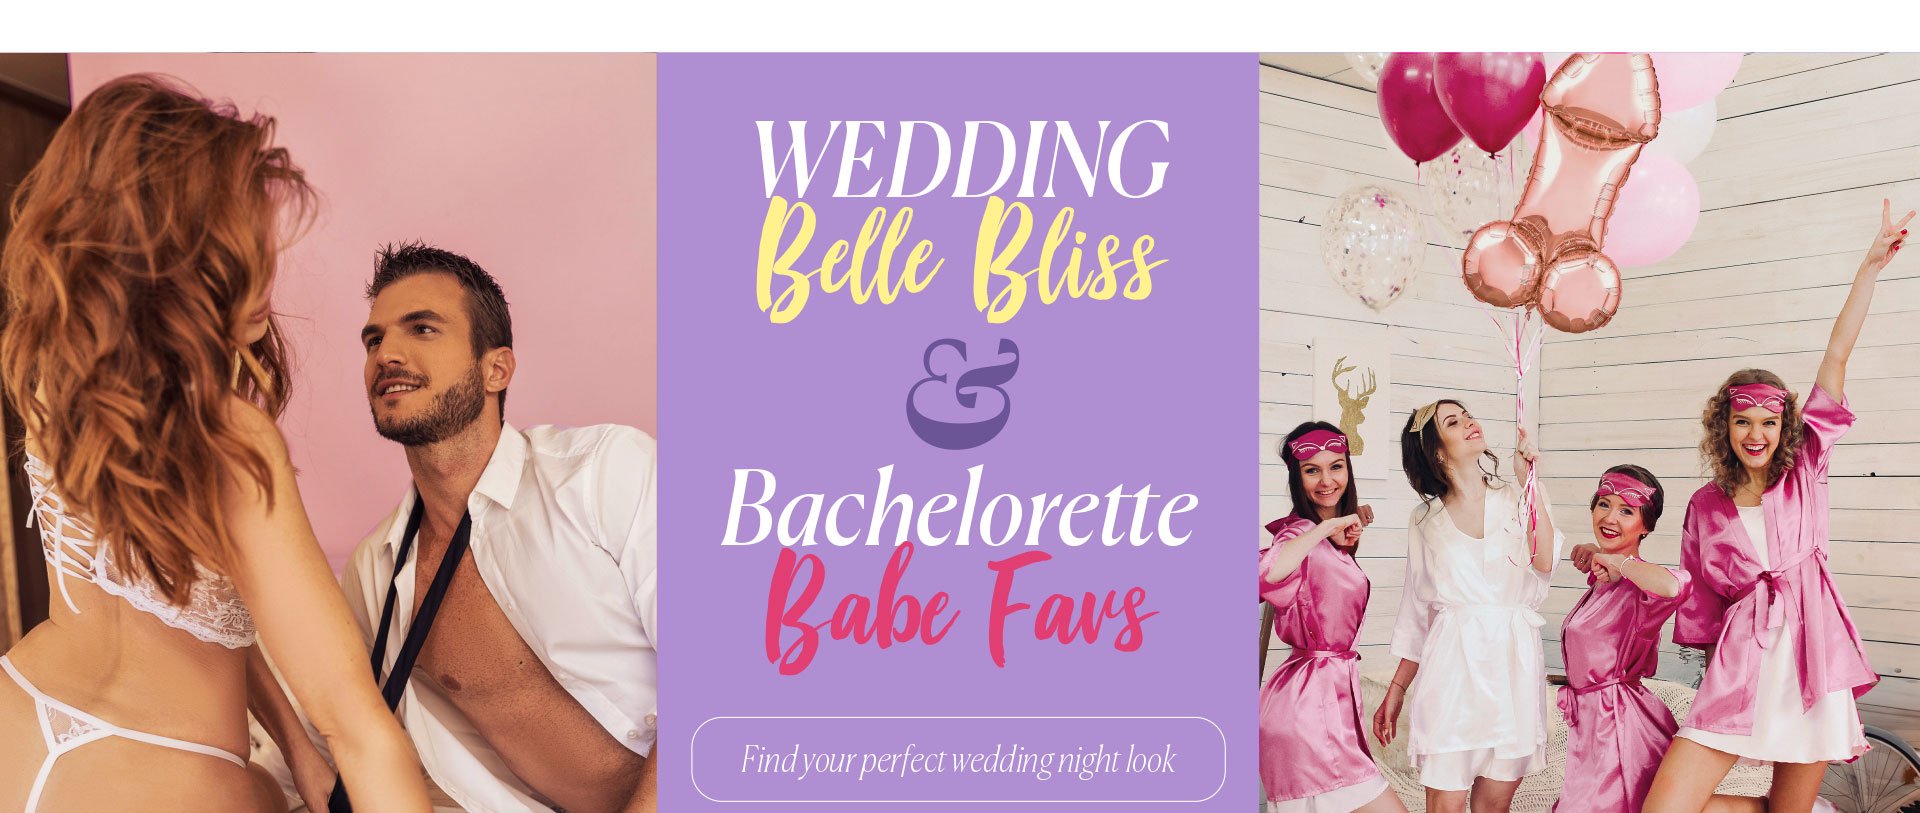 Wedding Belle Bliss & Bachelorette Babe Favs - Find Your Perfect wedding night look